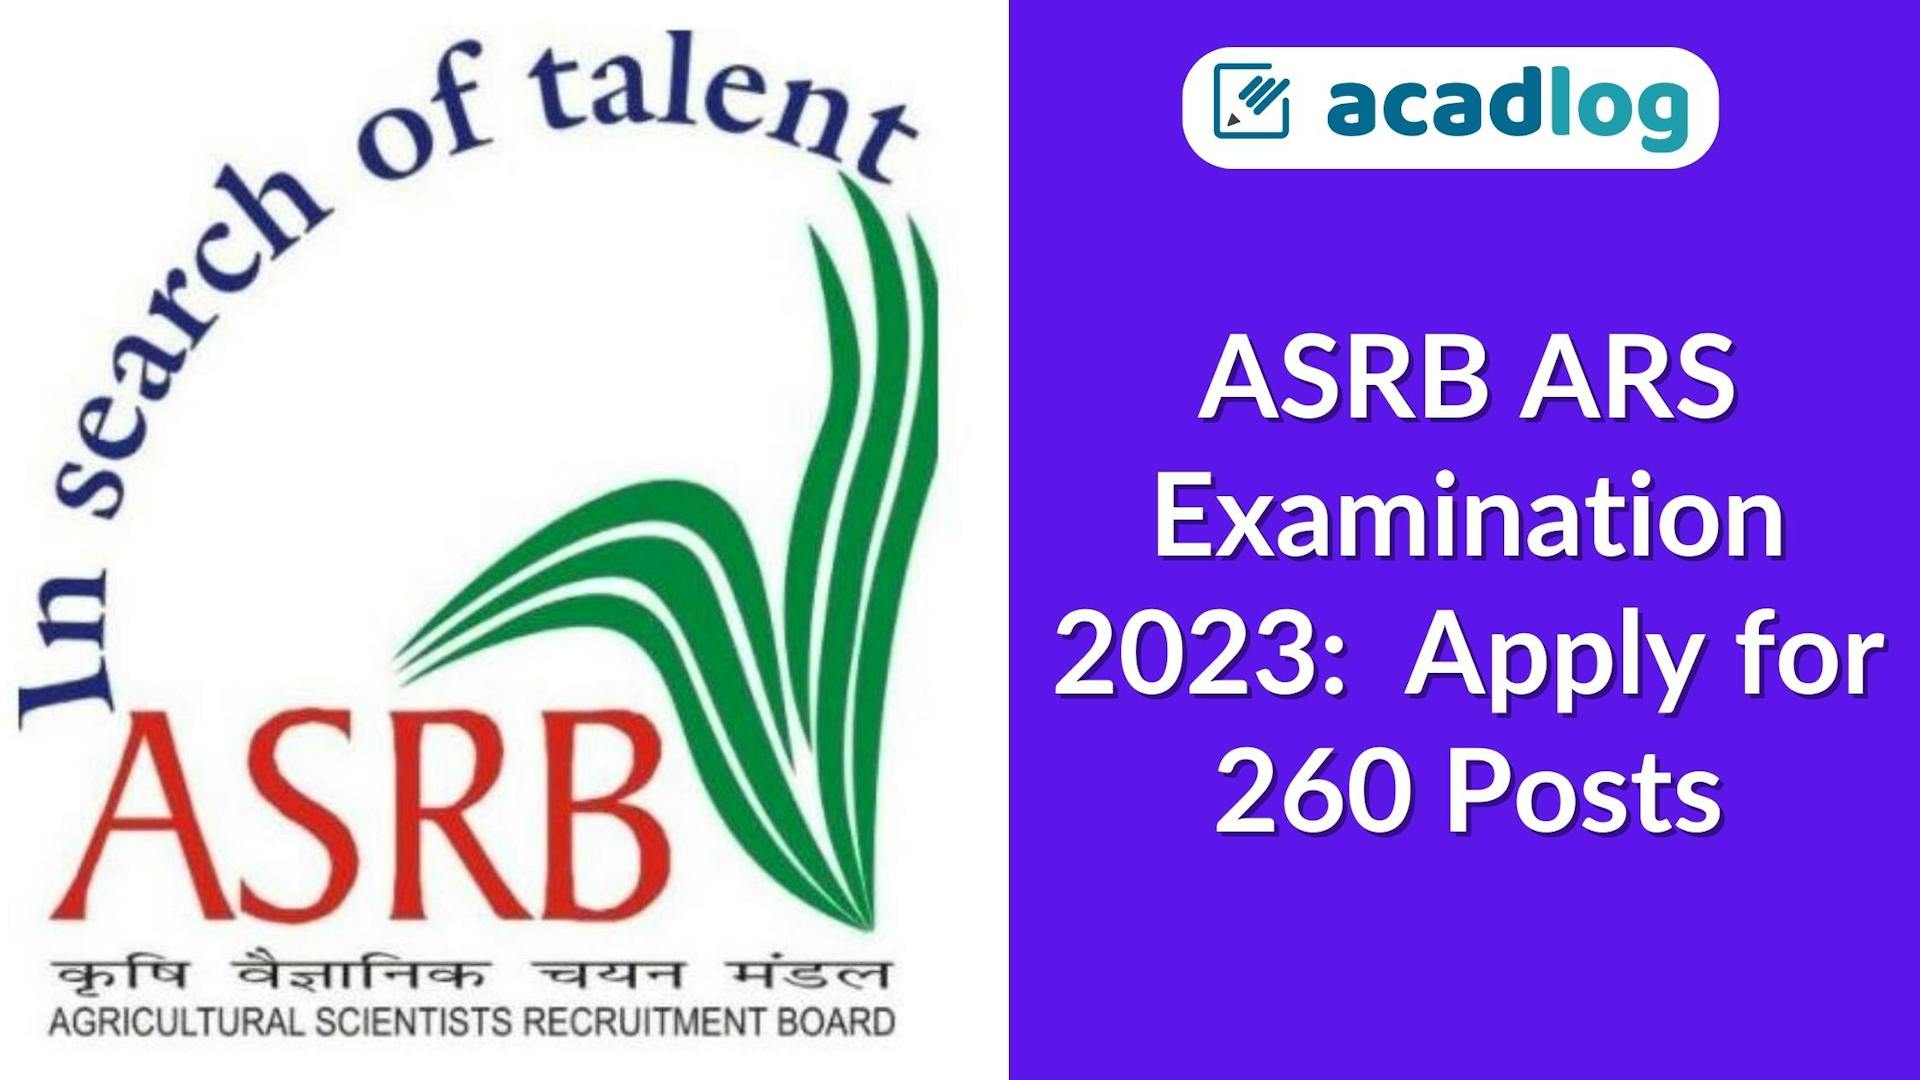 ASRB ARS Recruitment 2023: Invitation for 260 Posts